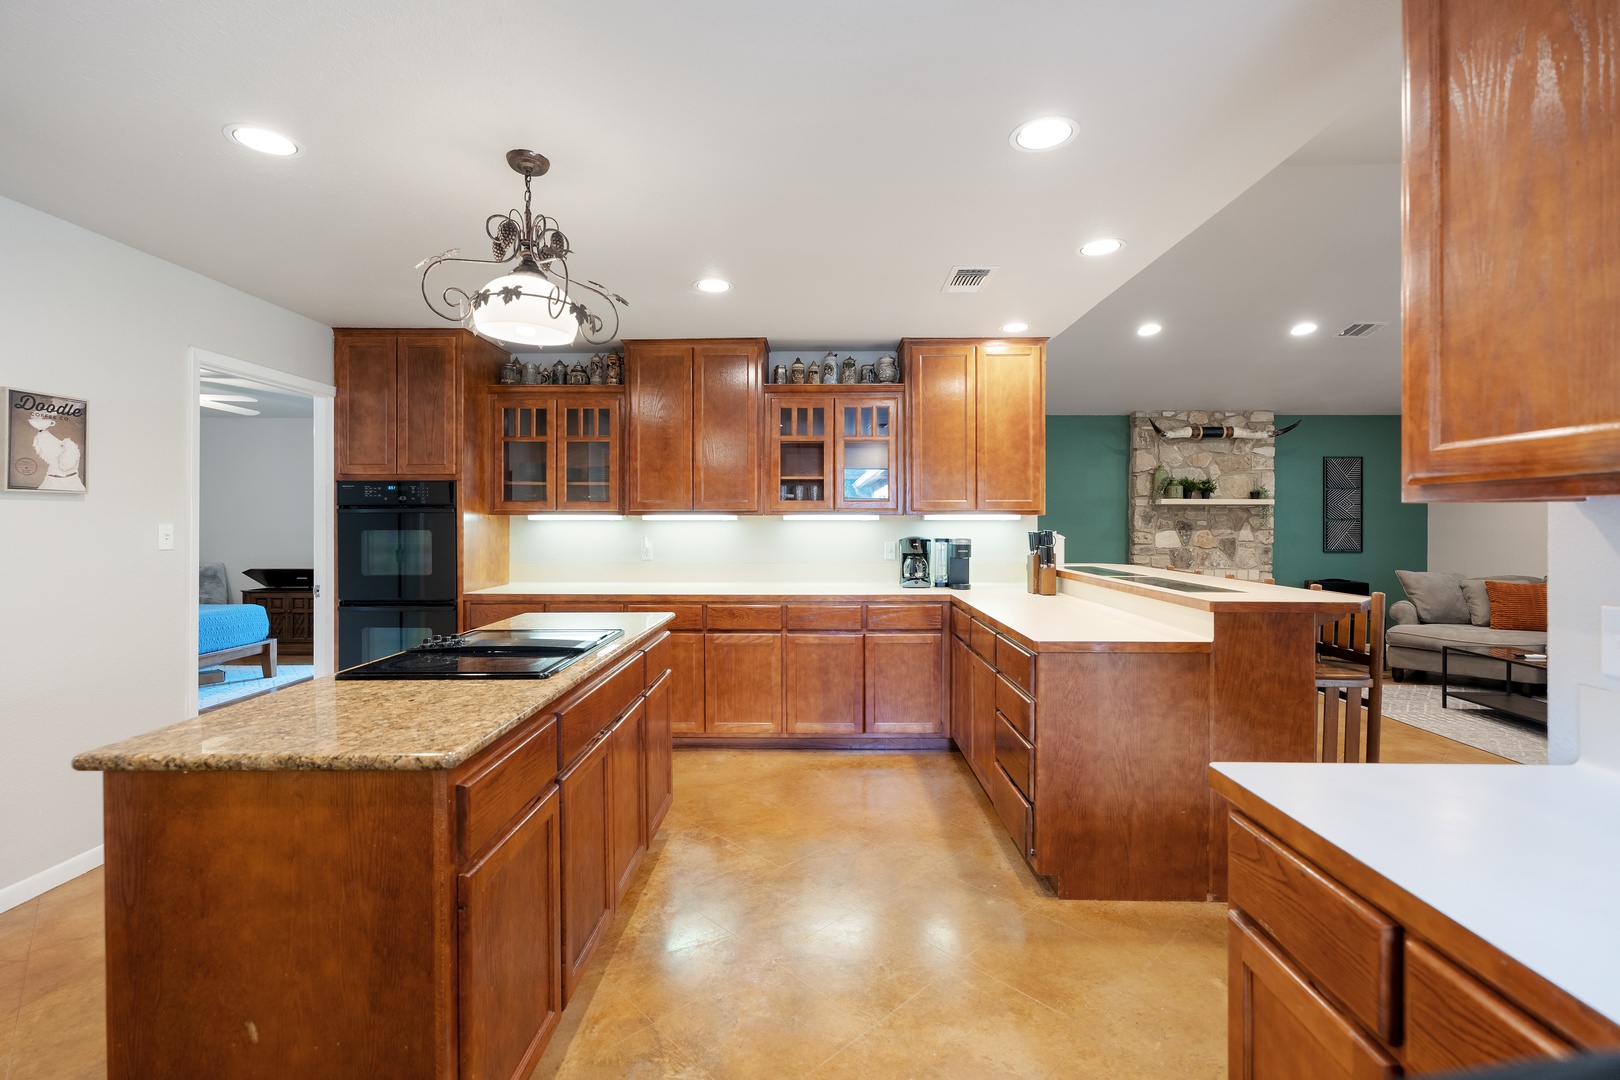 The main house kitchen is spacious and open, with all the comforts of home